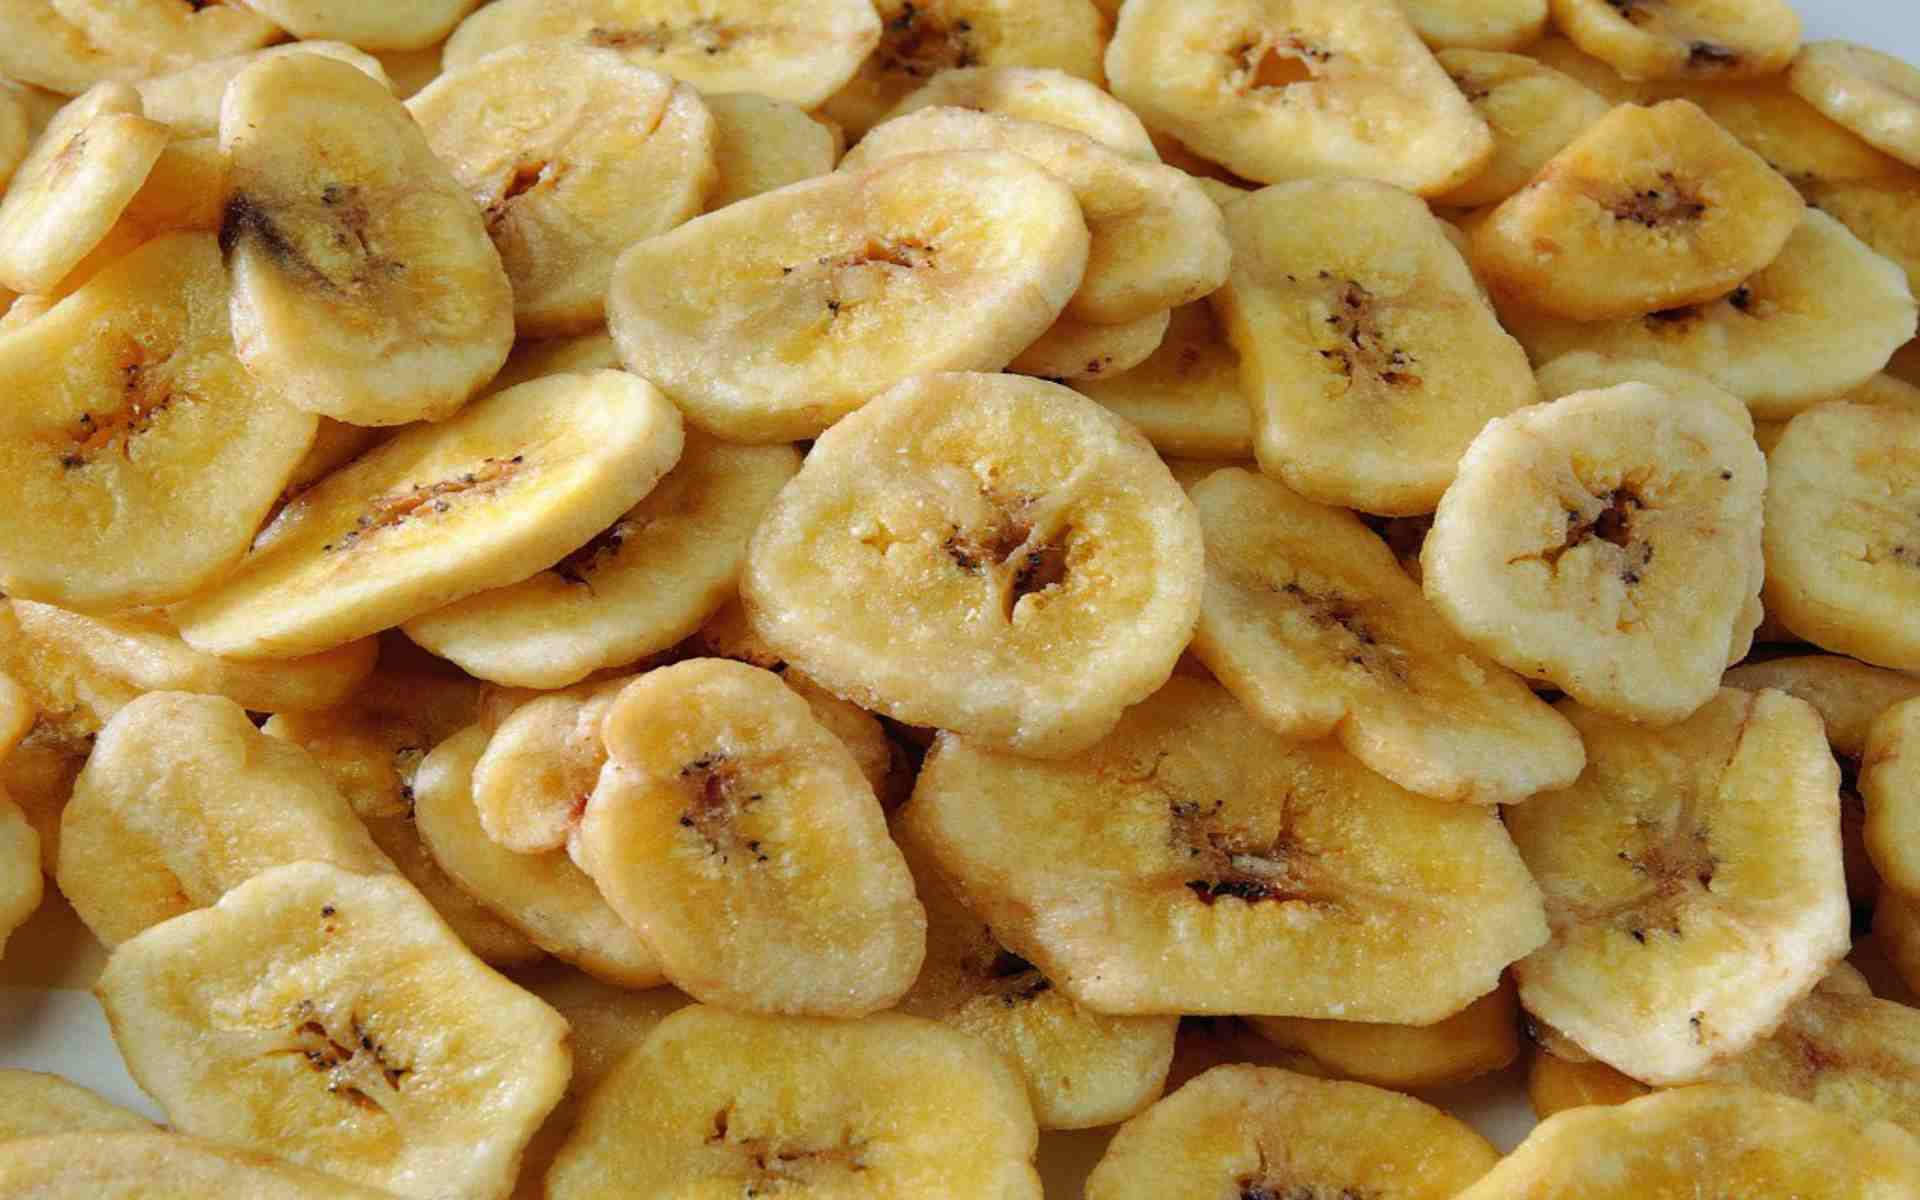 Pile Of Bananas Slices